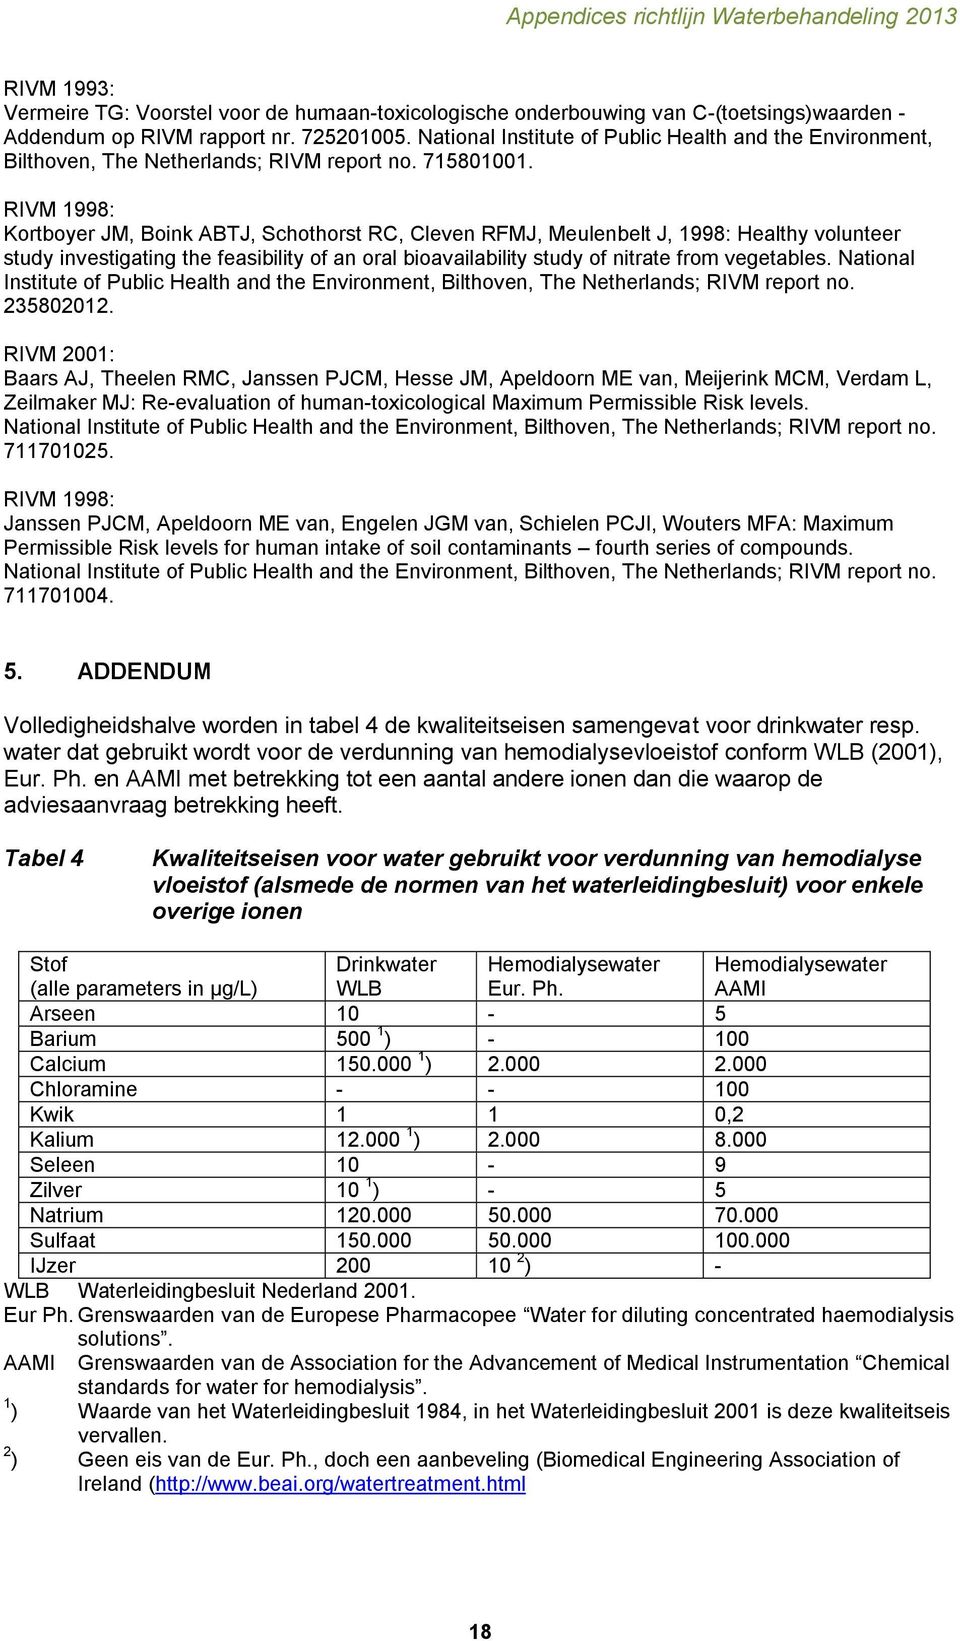 RIVM 1998: Kortboyer JM, Boink ABTJ, Schothorst RC, Cleven RFMJ, Meulenbelt J, 1998: Healthy volunteer study investigating the feasibility of an oral bioavailability study of nitrate from vegetables.